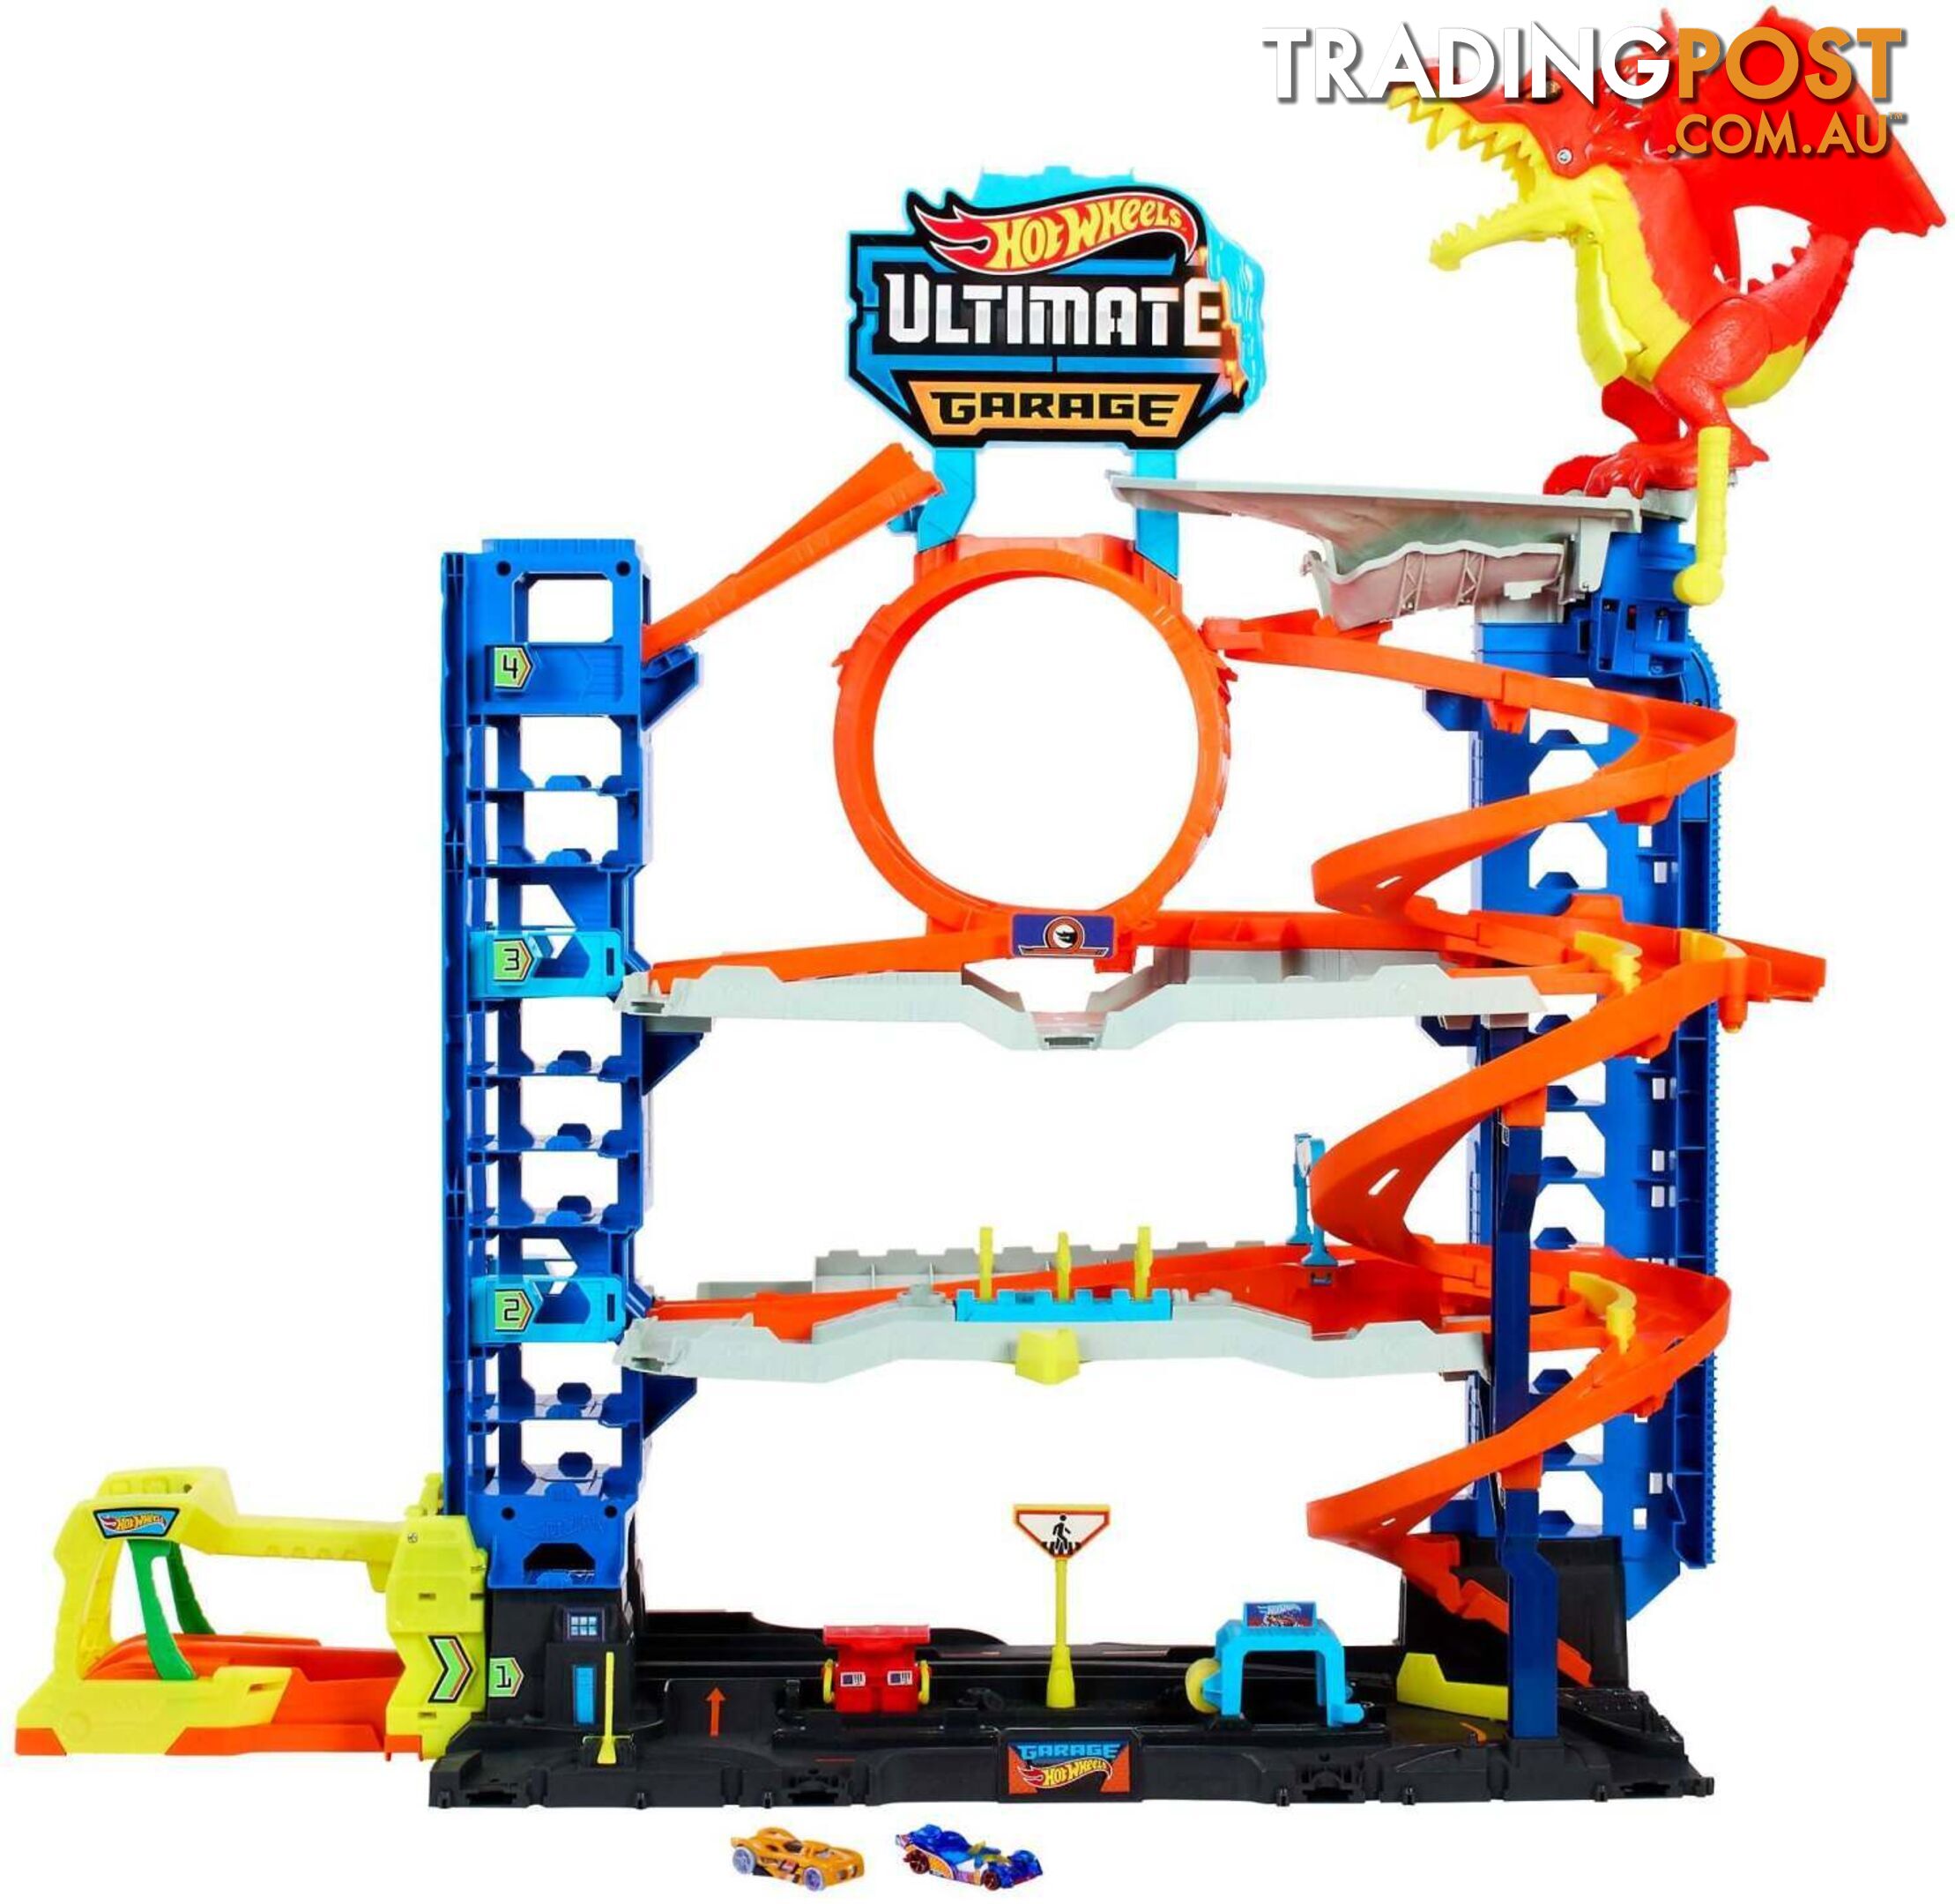 Hot Wheels - City Ultimate Garage Playset With 2 Die-cast Cars Toy Storage For 50+ Cars - Mattel - Mahkx48 - 194735109722